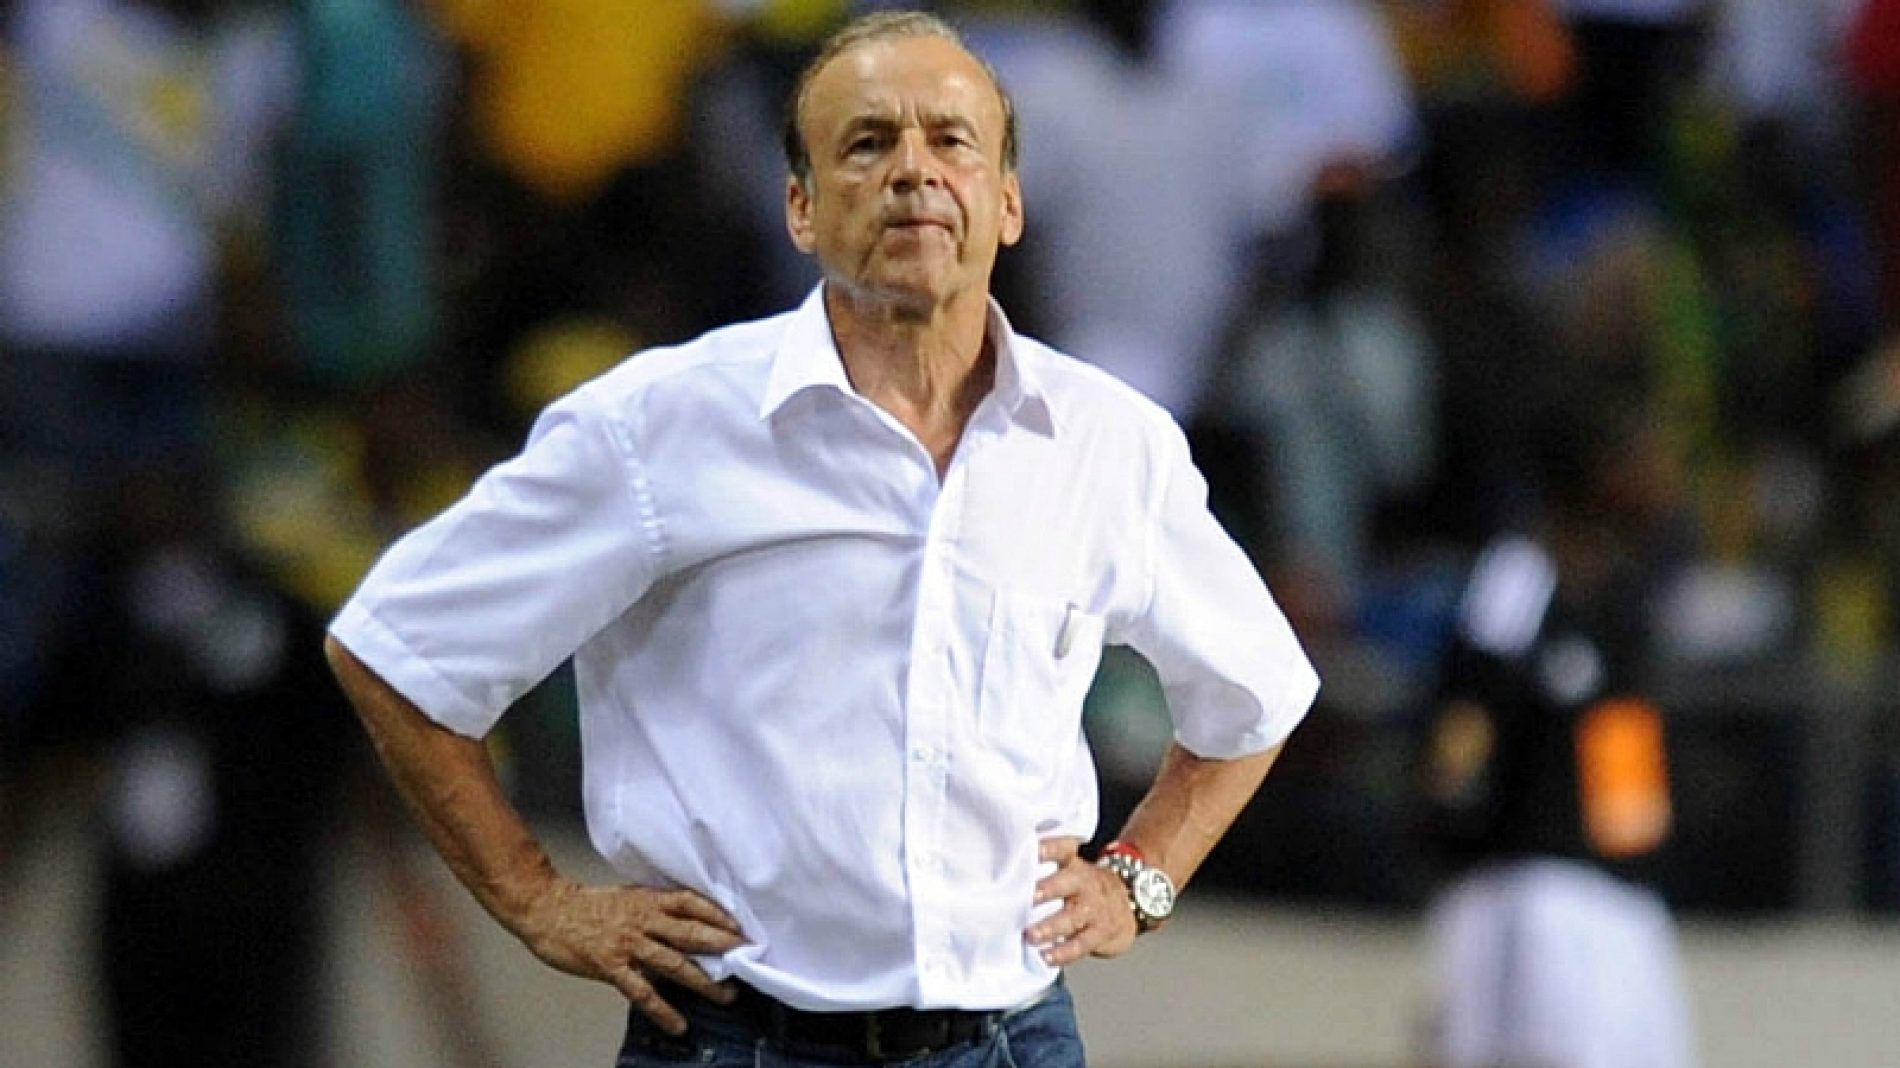 NFF Sacks Rohr As Super Eagles Coach, Makes New Appointment